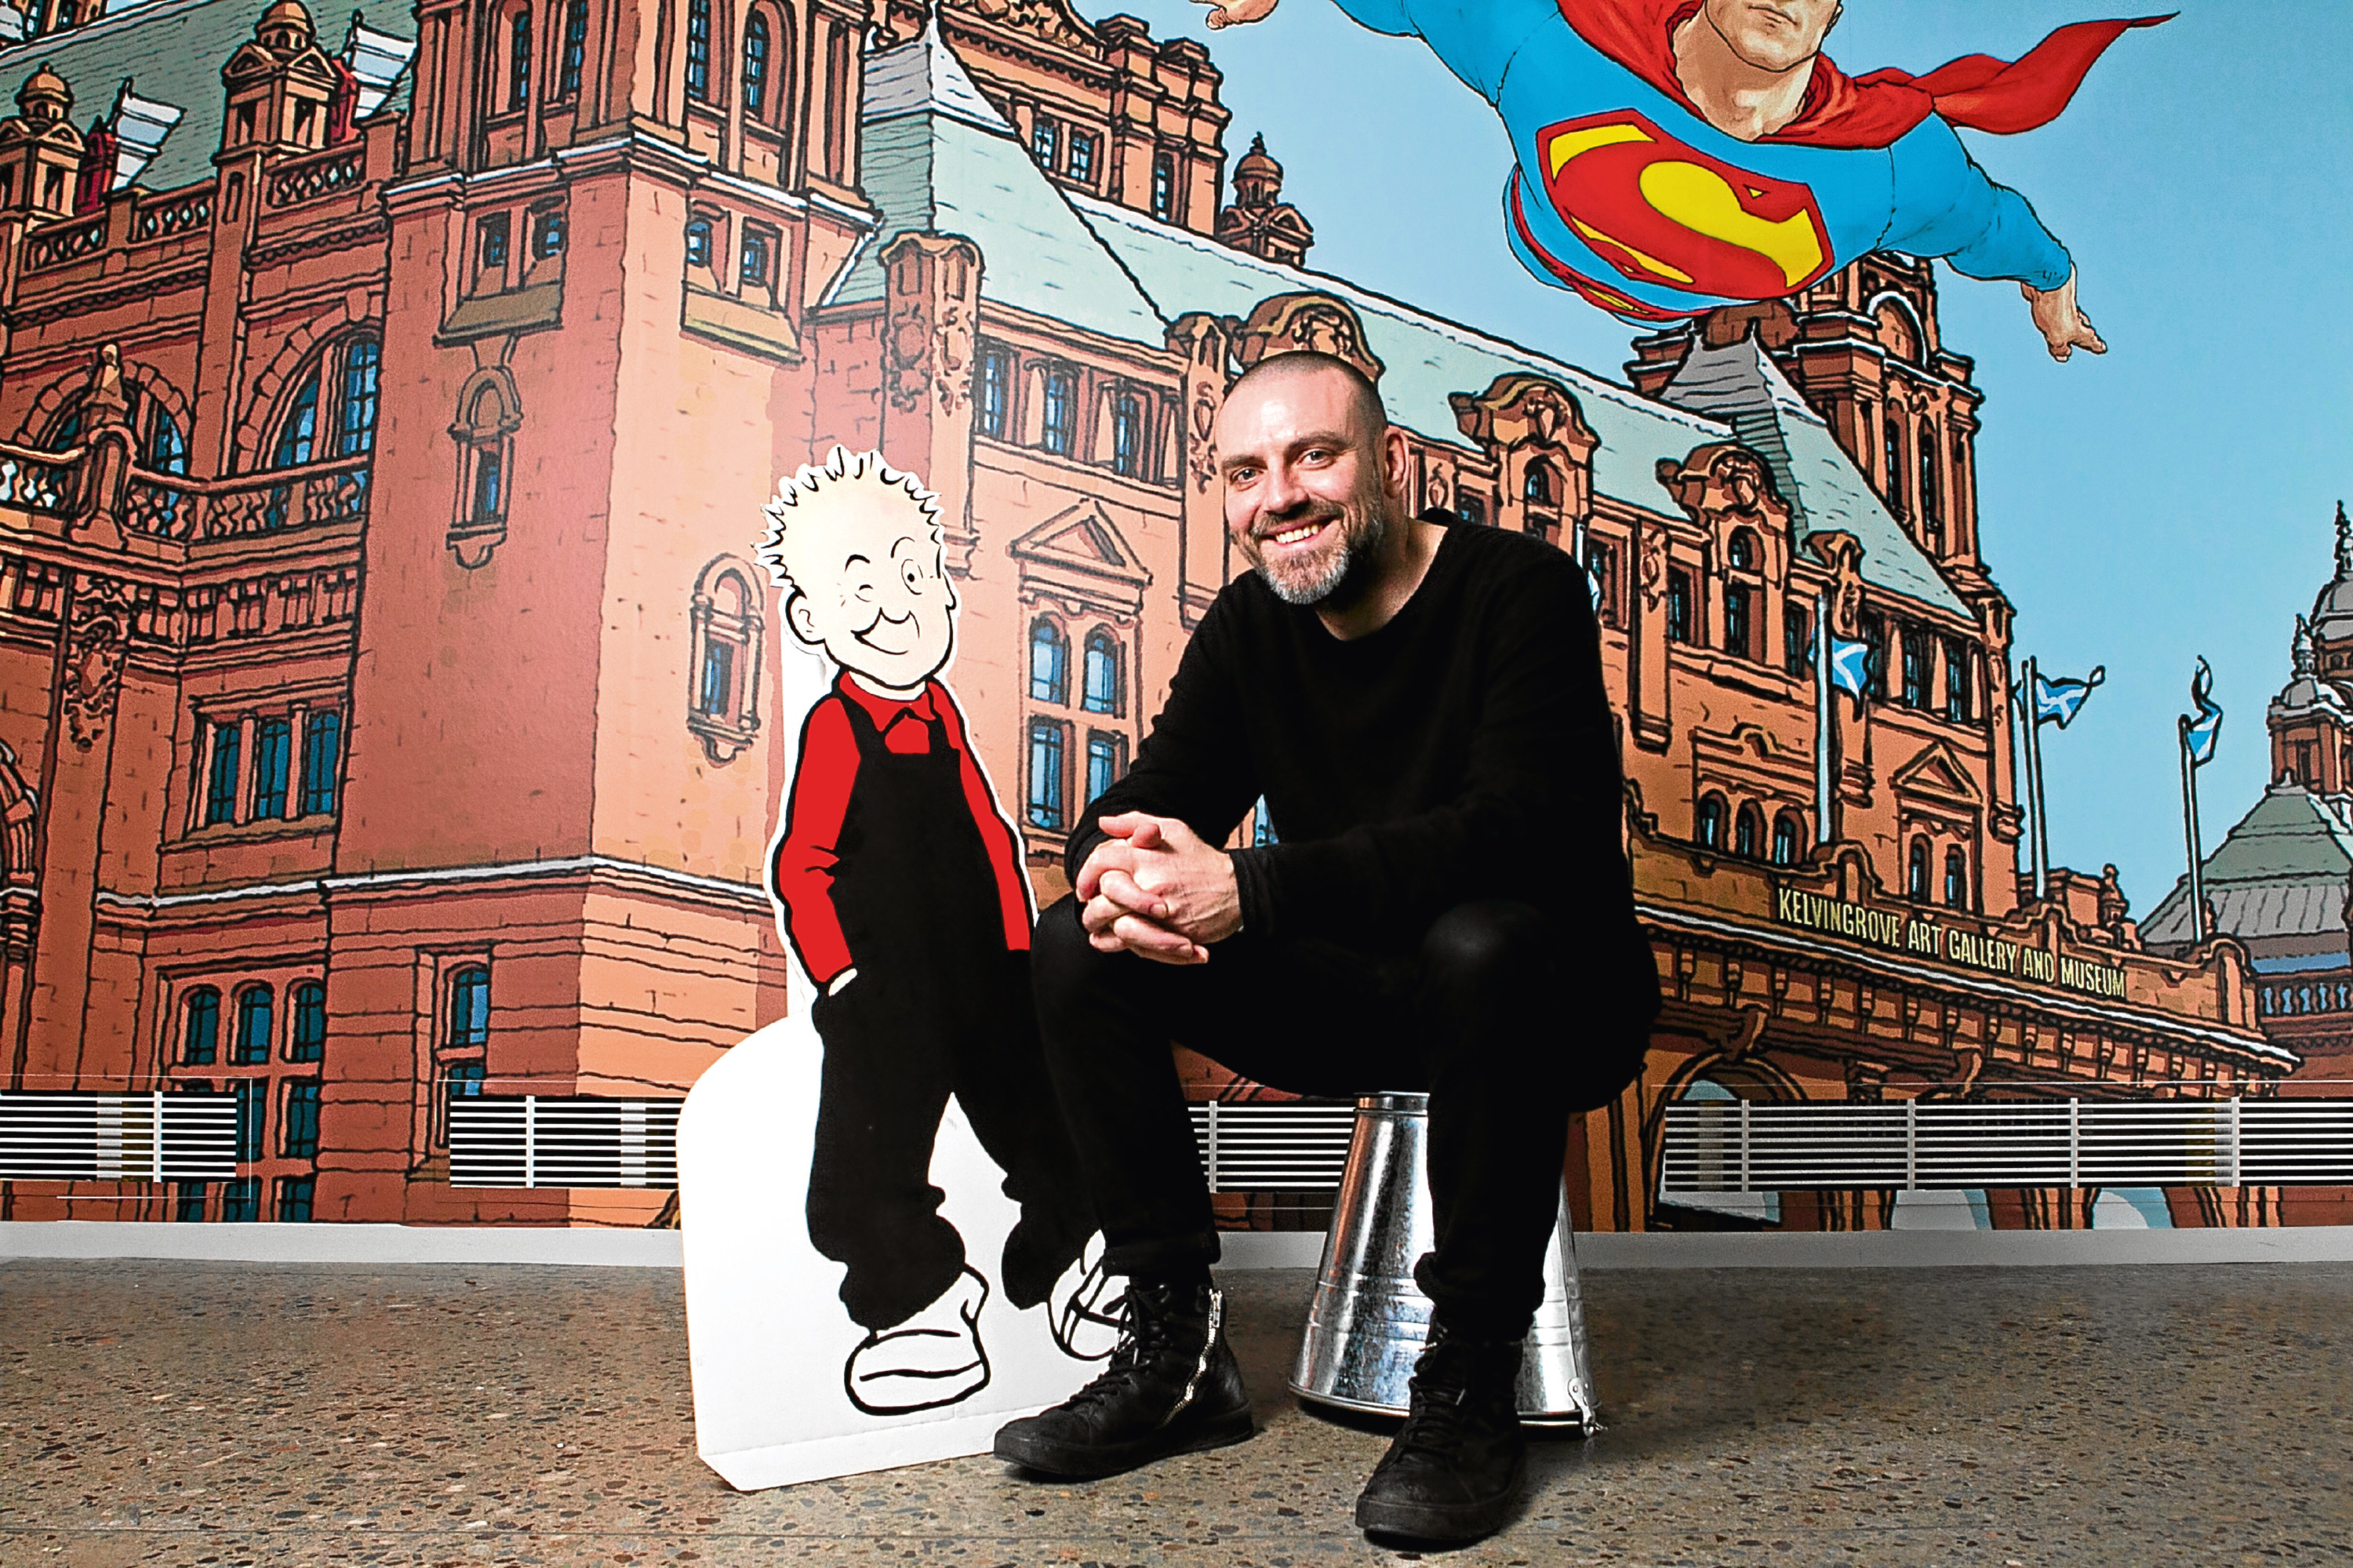 Vin Deighan, (aka Frank Quitely) was inspired by Oor Wullie and the Broons (Andrew Cawley / DC Thomson)